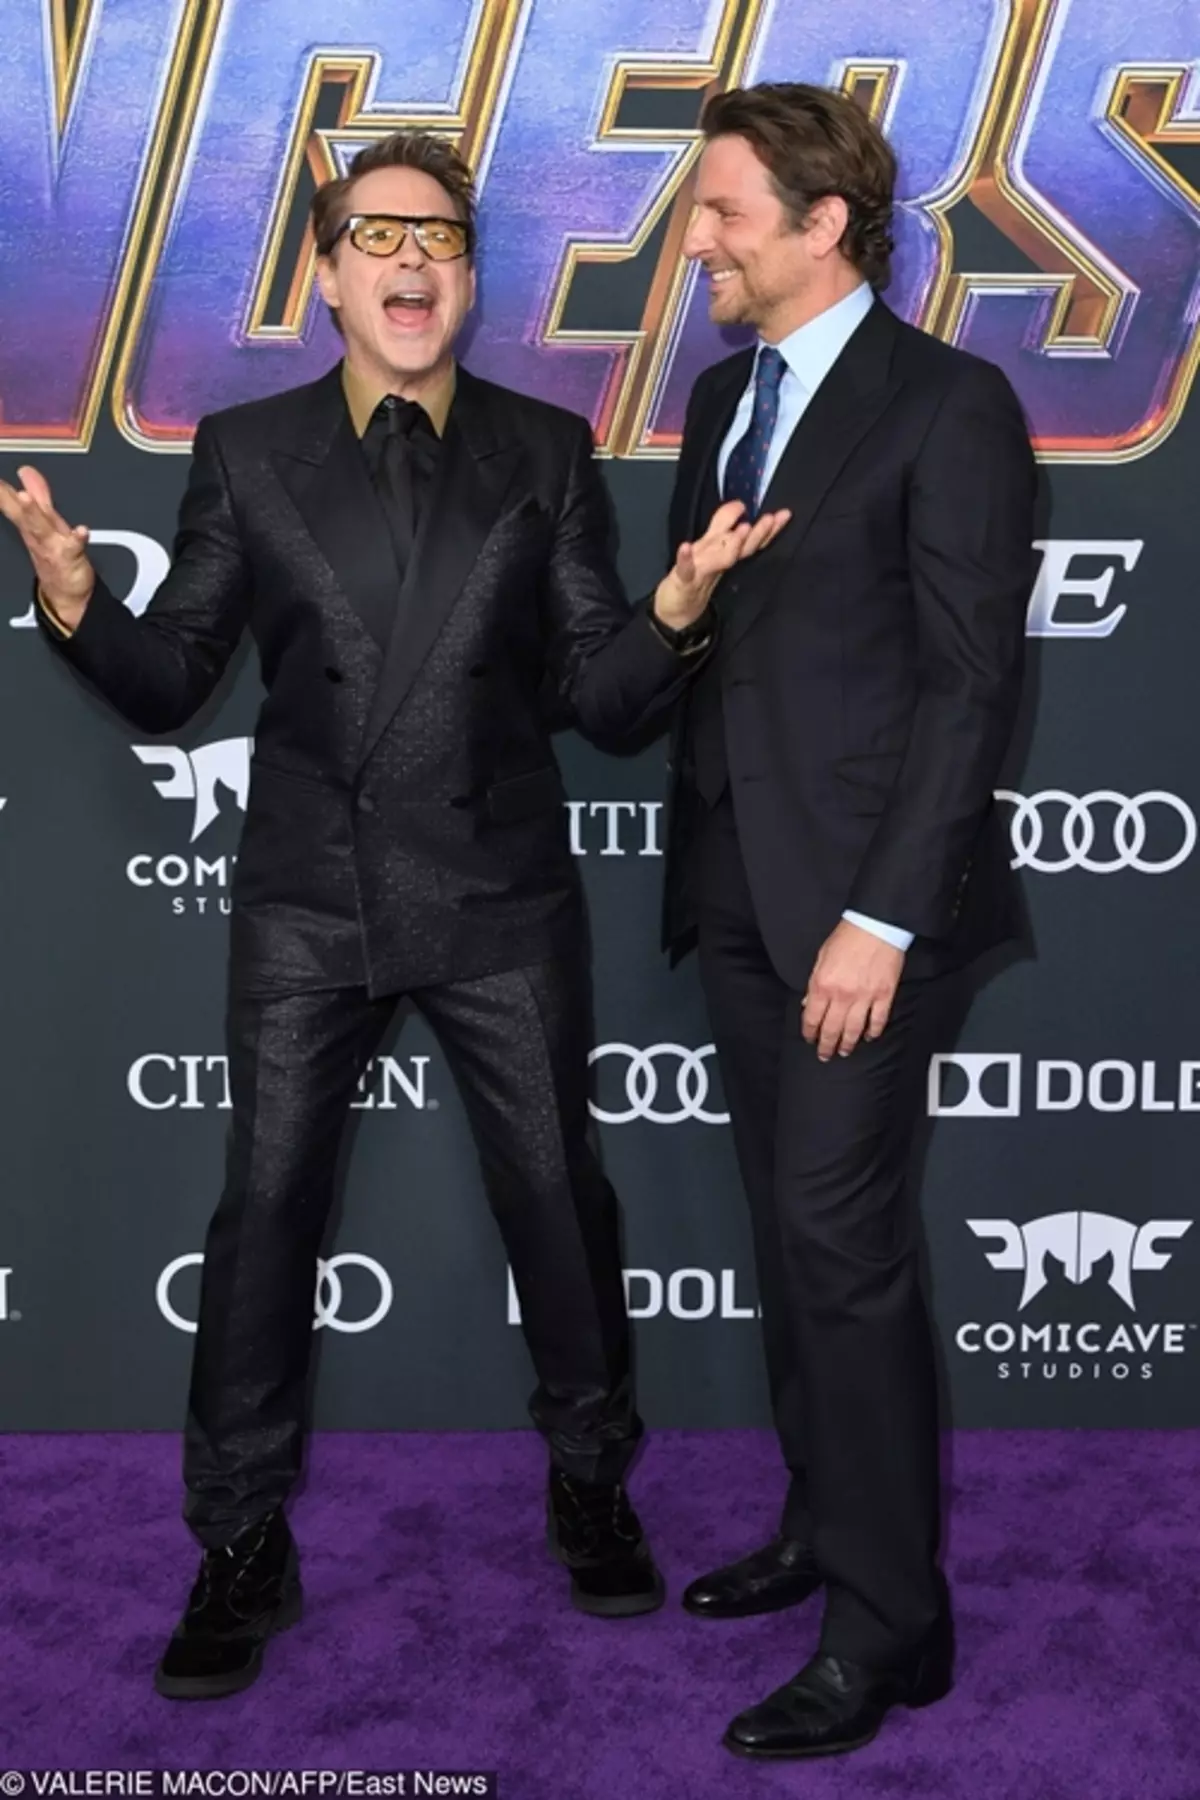 Robert Downey Jr., Chris Evans and other stars at the premiere of the film 